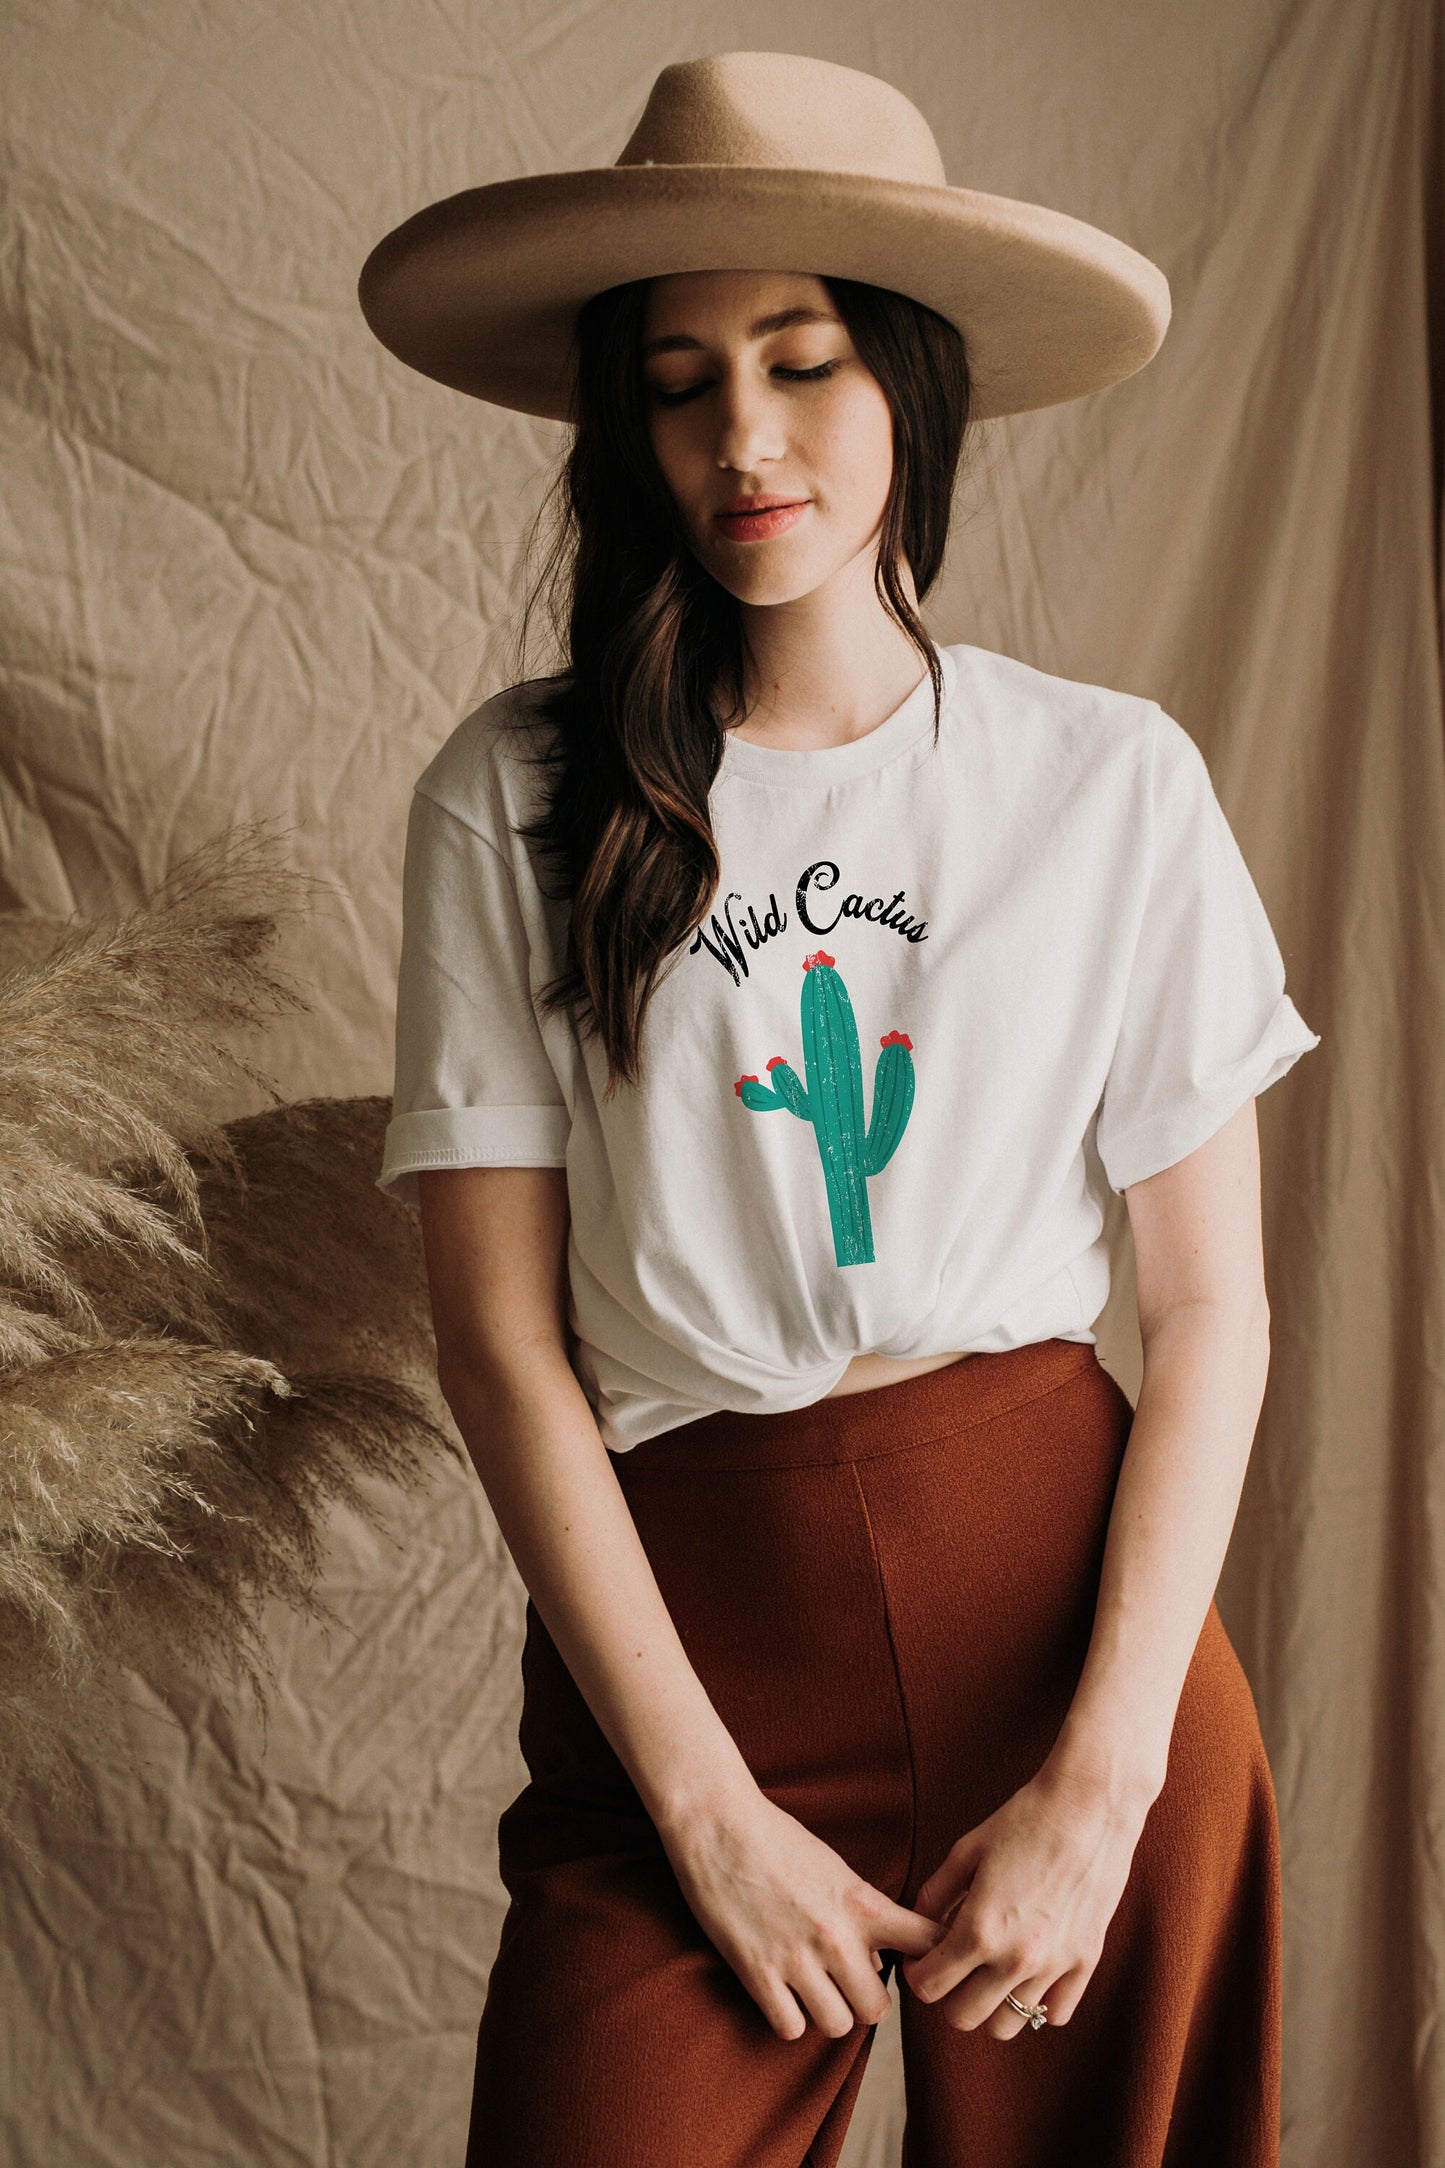 Wild Cactus Vintage Retro Succulent Style Ultra Soft Graphic Tee Unisex Soft Tee T-shirt for Women or Men